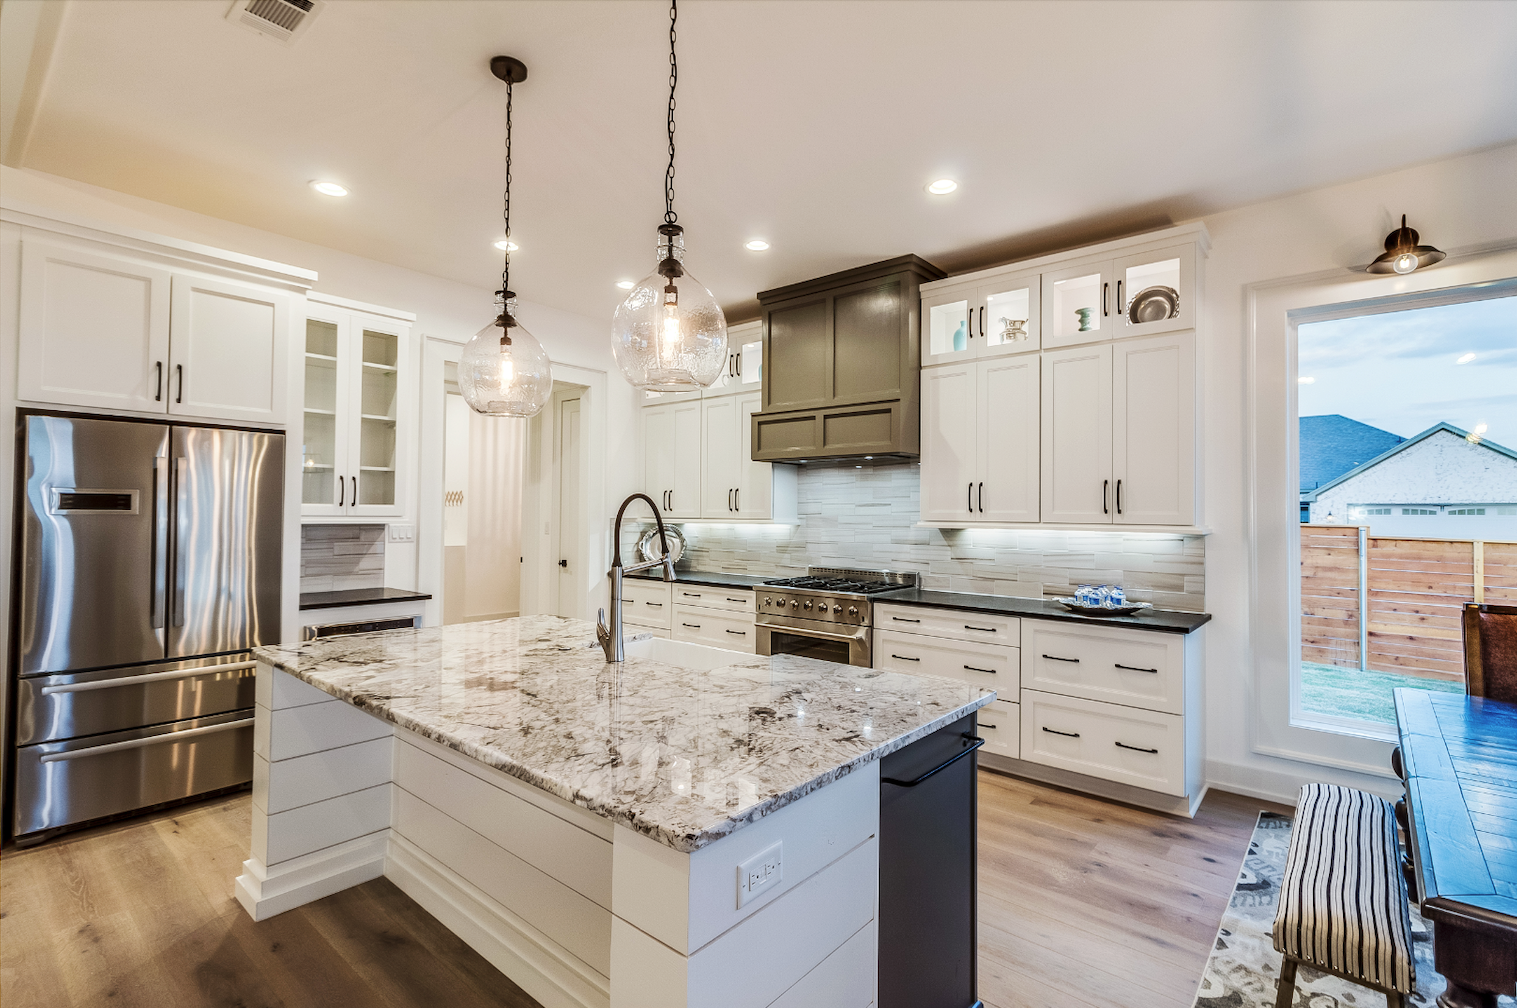 Granite Countertops: Weighing the Pros and Cons for Your Home